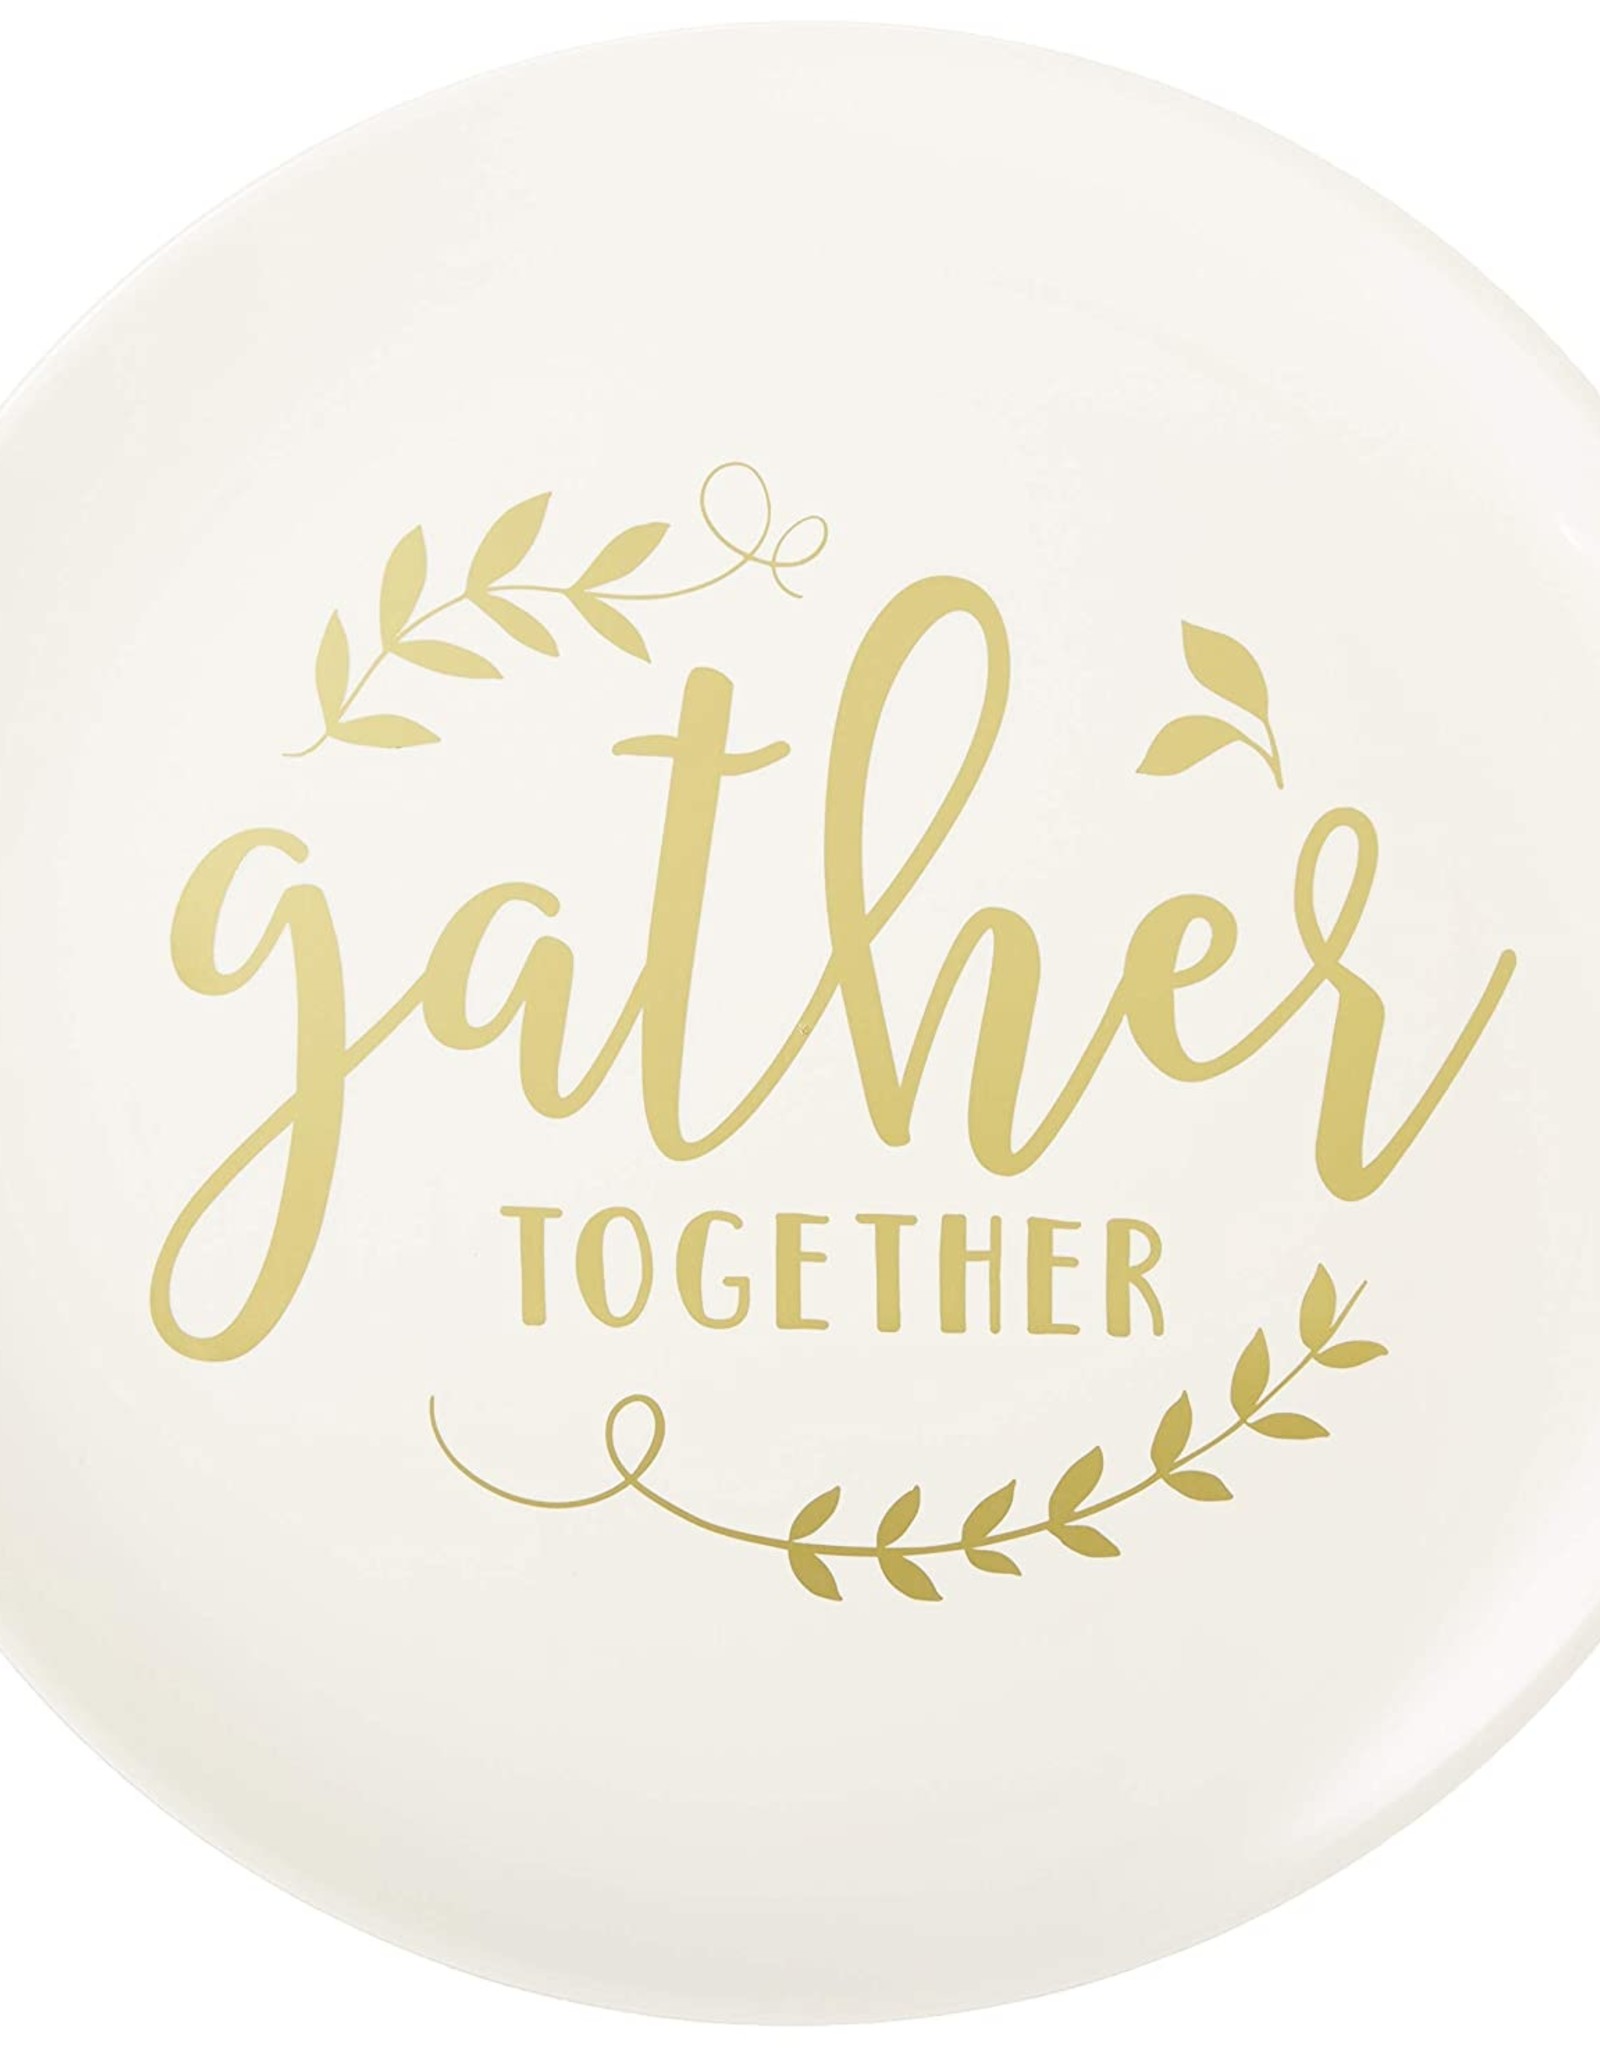 Gather Together Plates